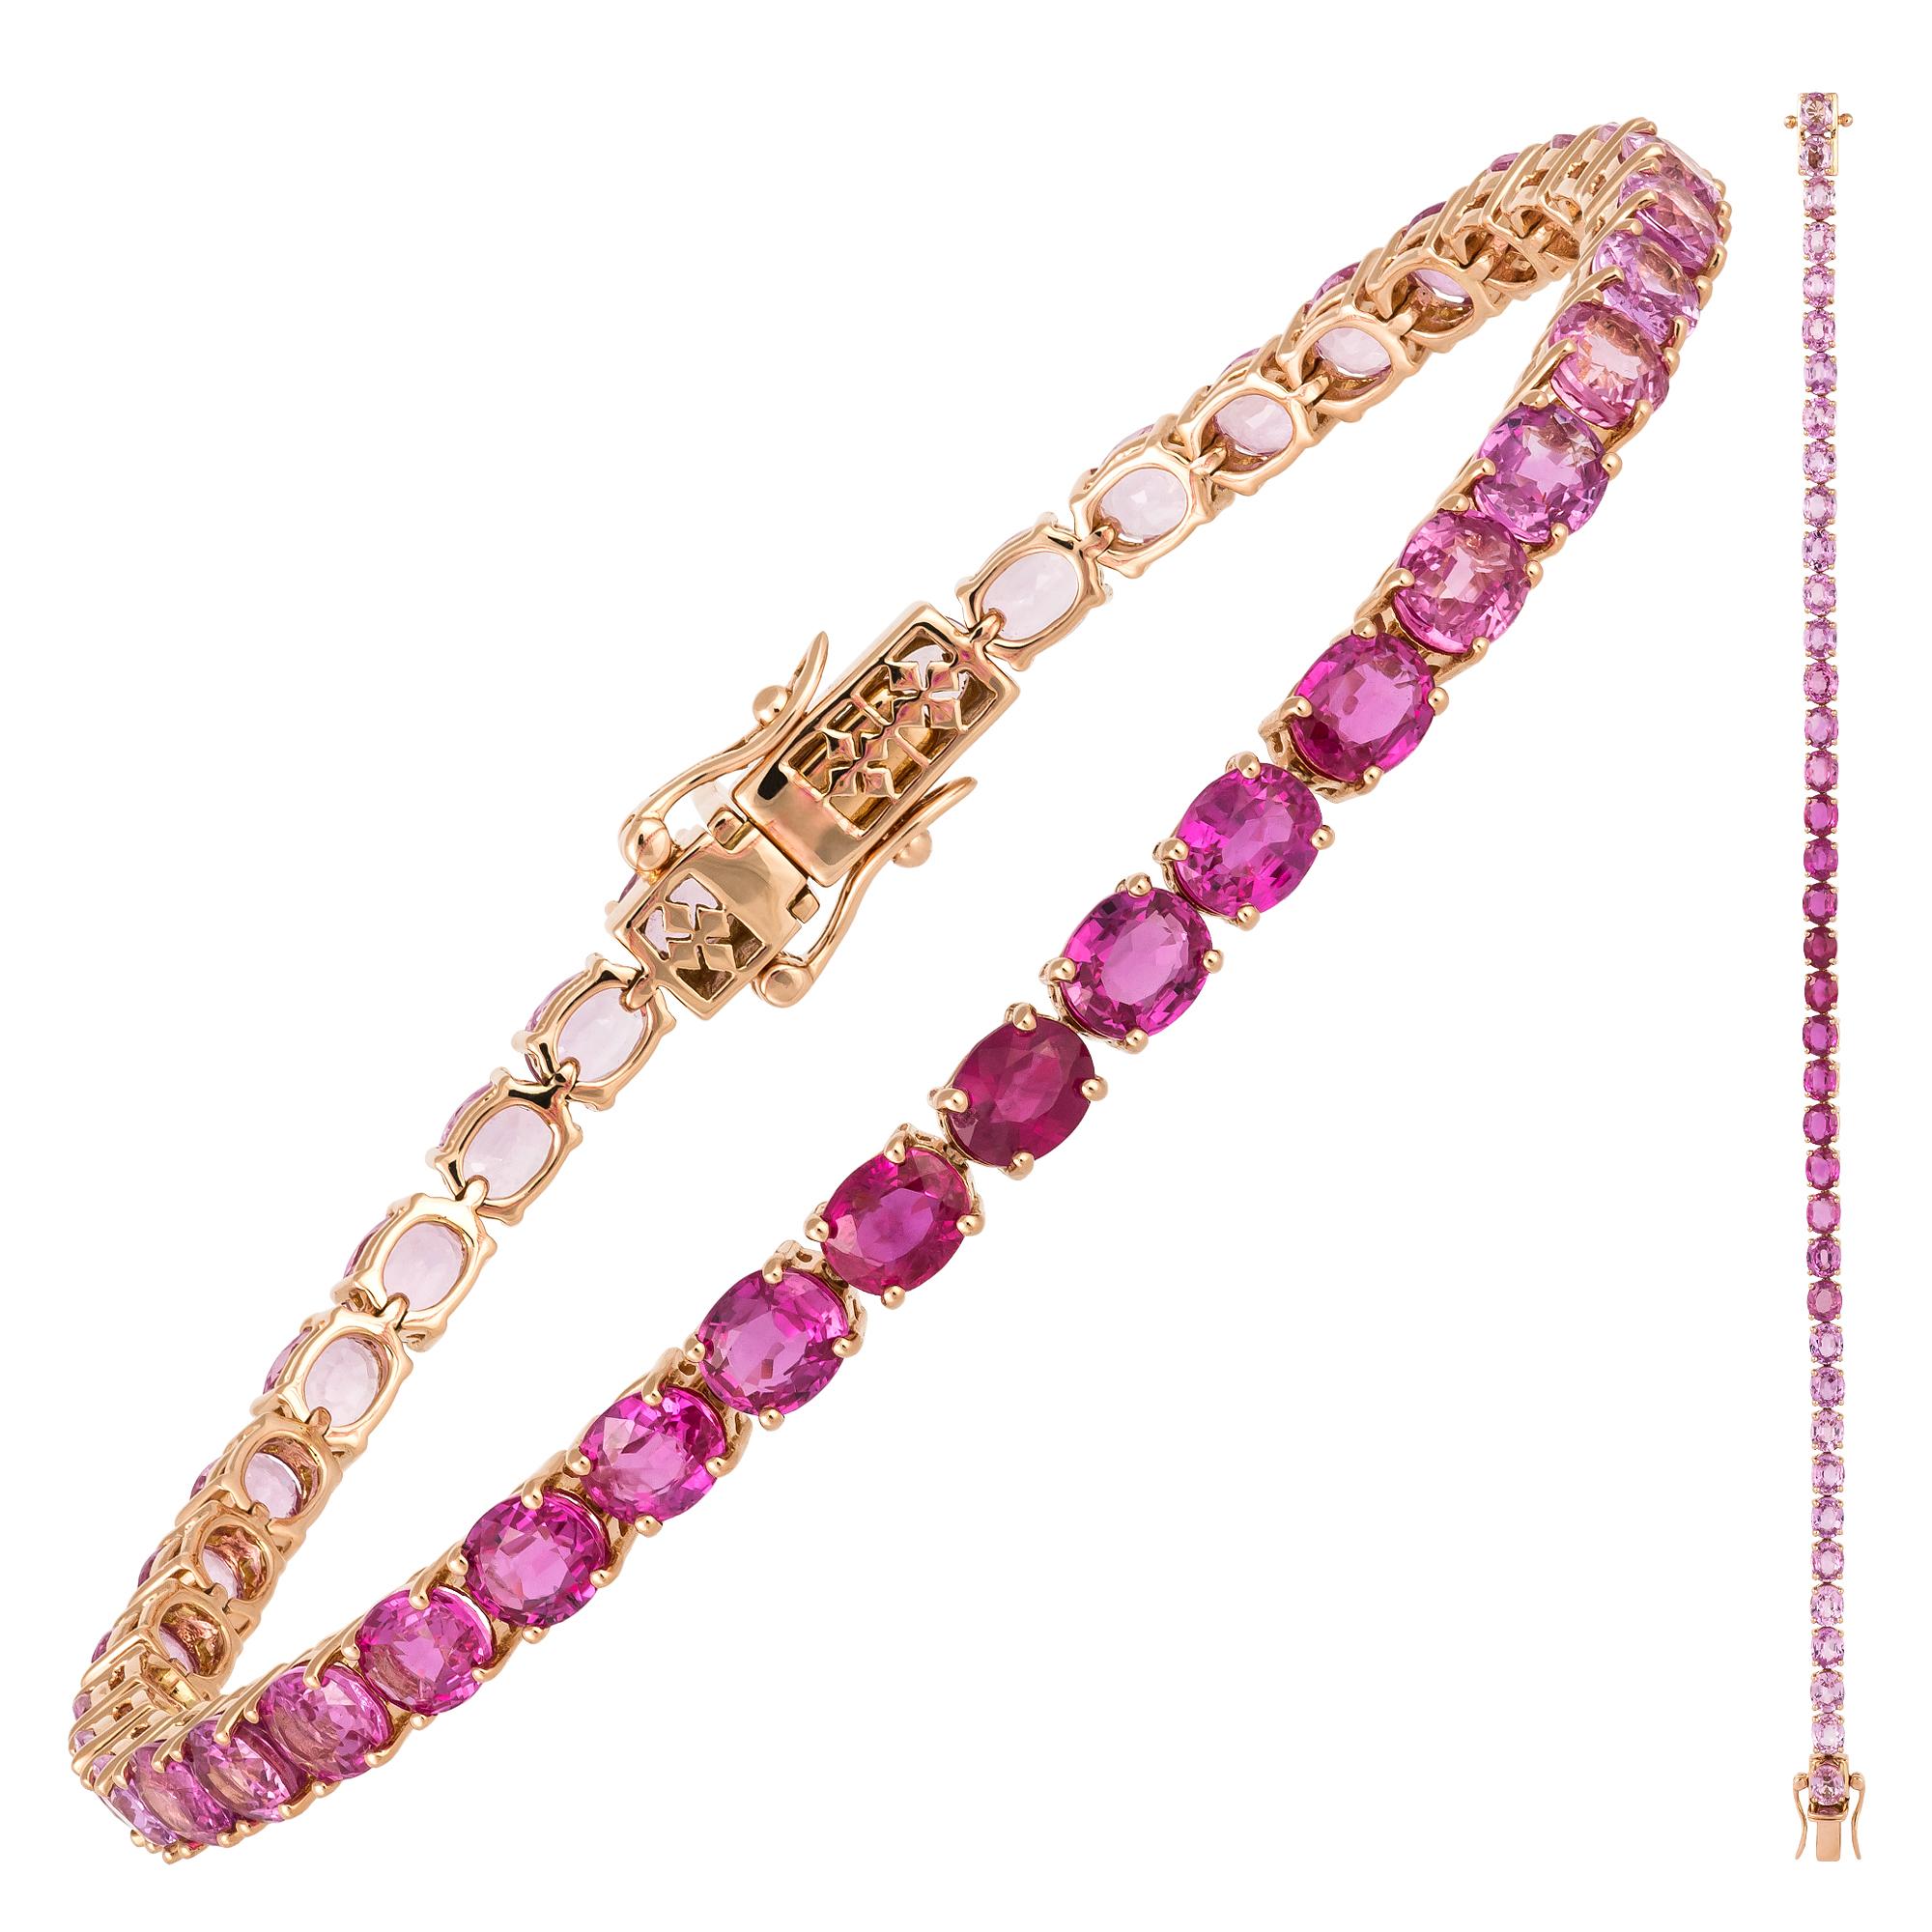 Diamond Tennis Bracelet 18K Rose Gold PS 7.85 Cts/24 Pcs Ruby 4.94 Cts/15 Pcs In New Condition For Sale In Montreux, CH